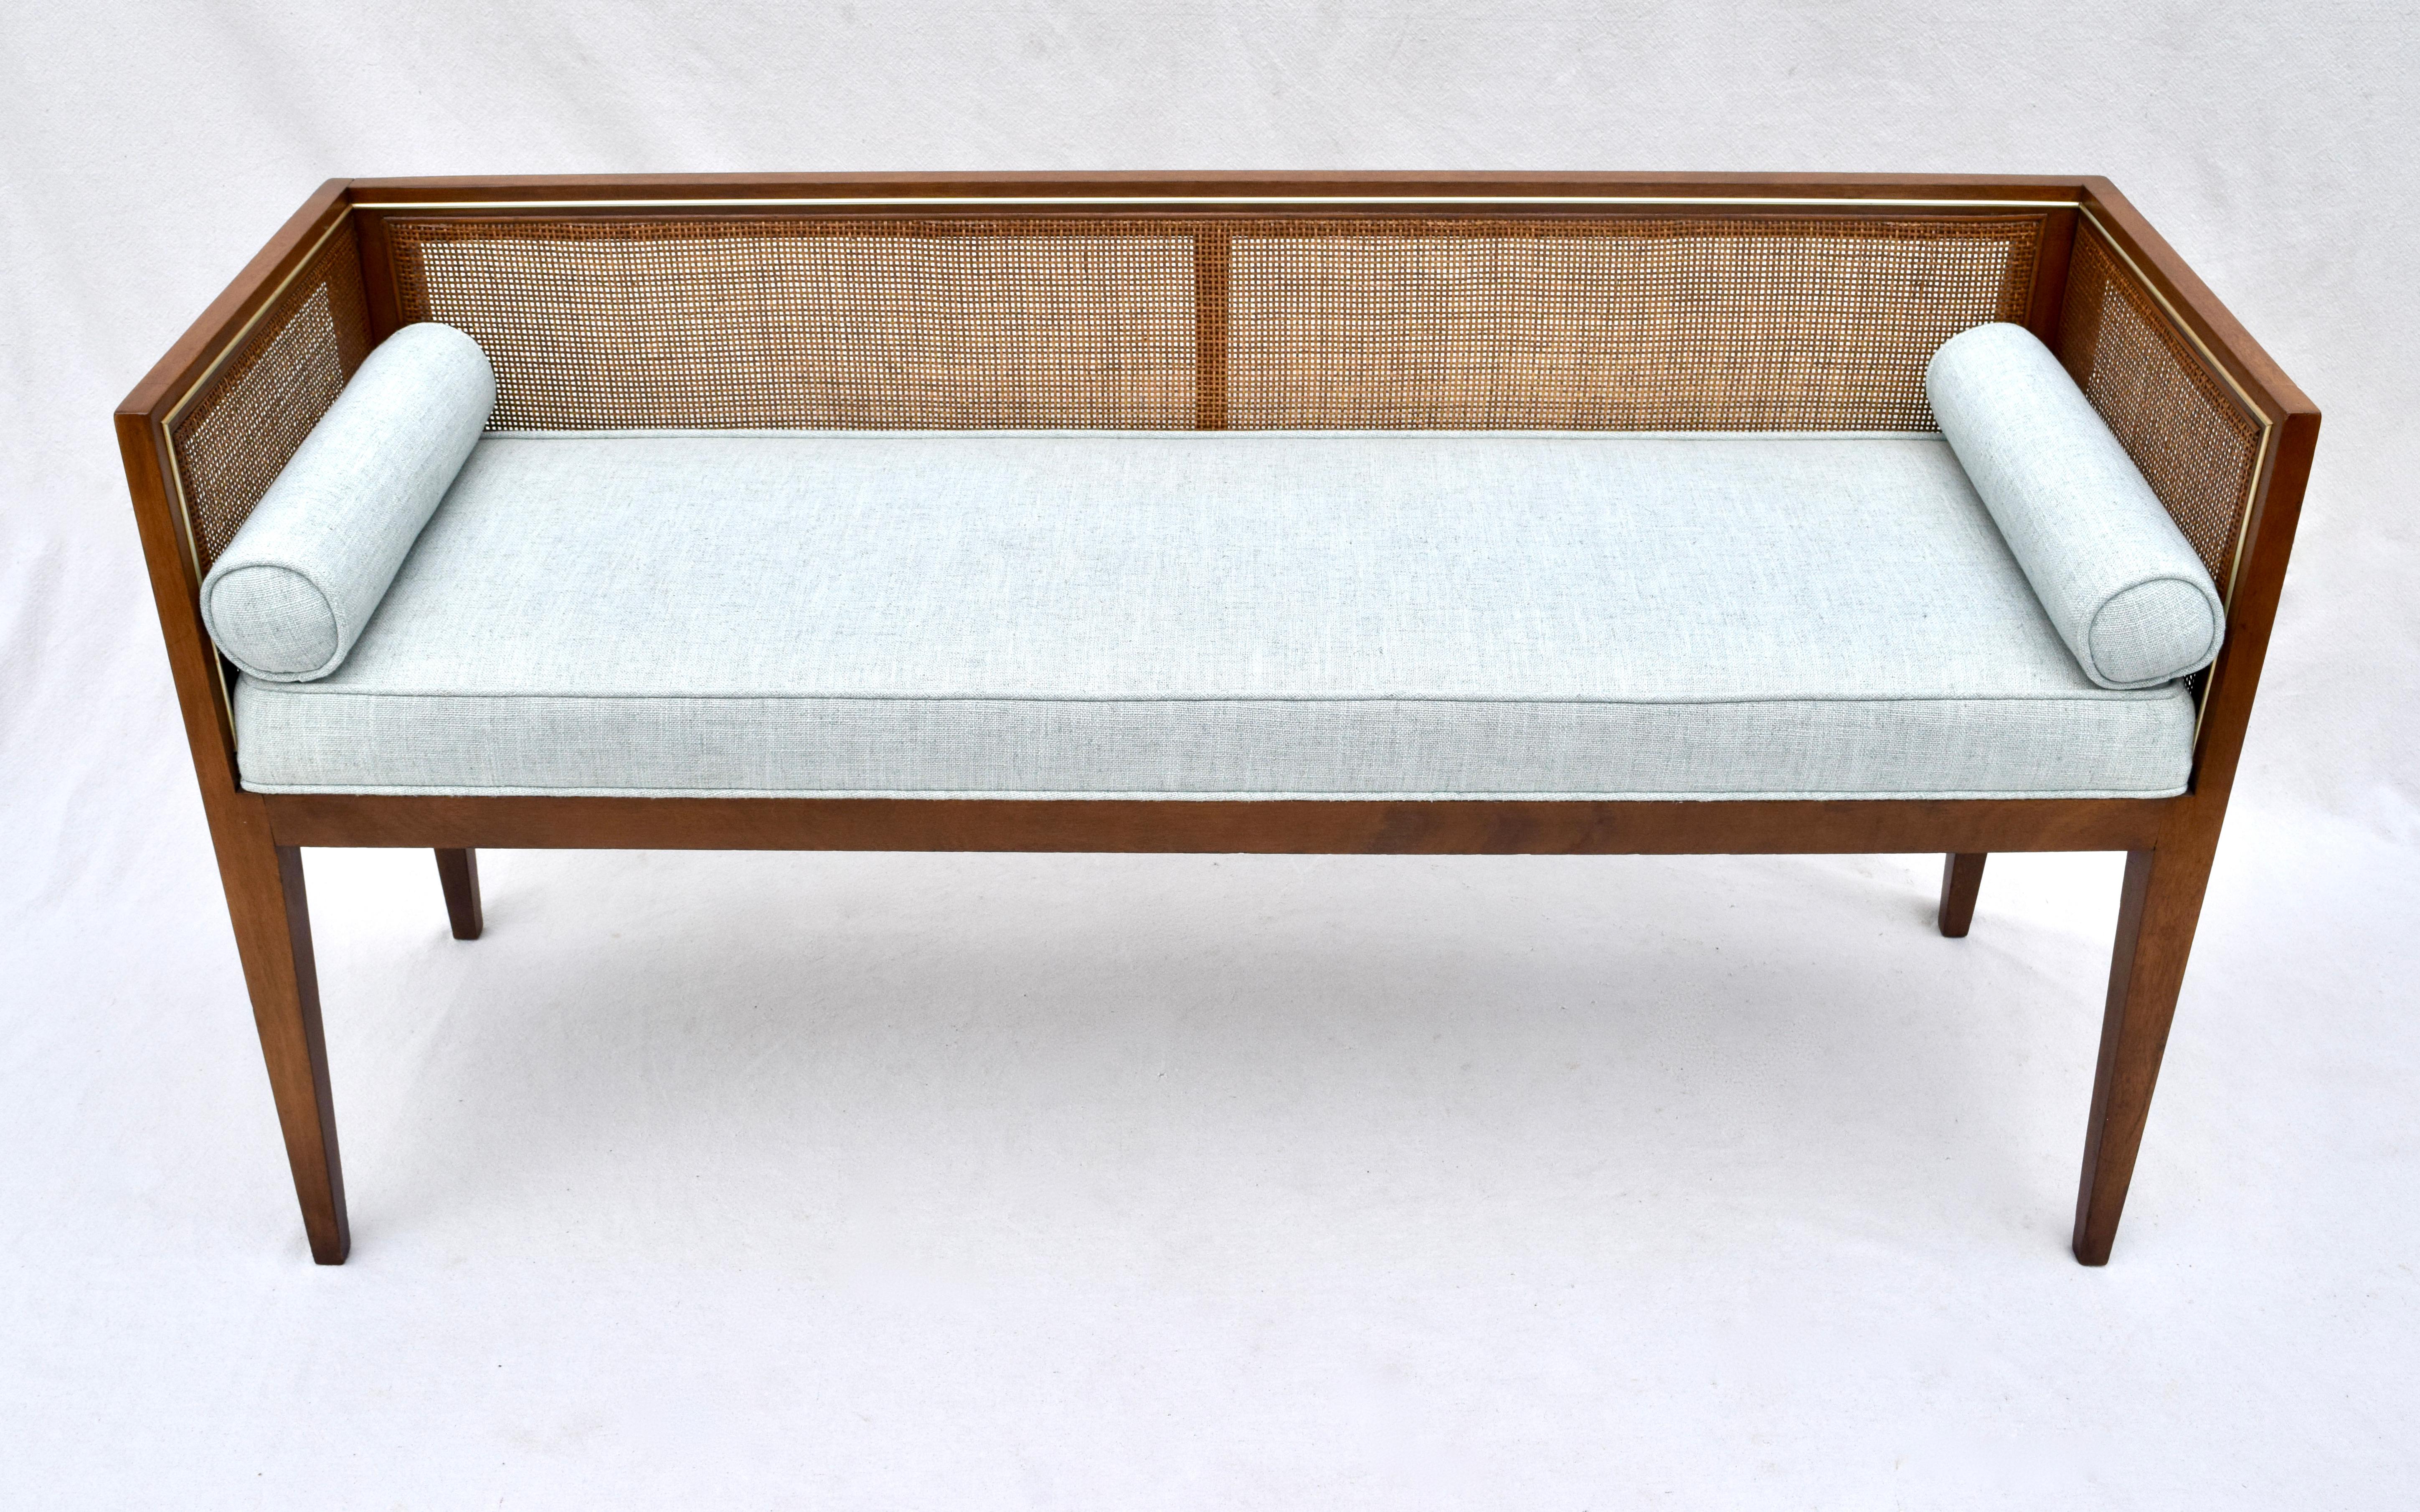 Solid walnut Mid-Century Modern window bench or settee attributed to Edward Wormley for Dunbar. Lithe line design constructed of walnut frame with original fine scale caning and subtle inlay brass bead accent to the interior surround. Fully detailed